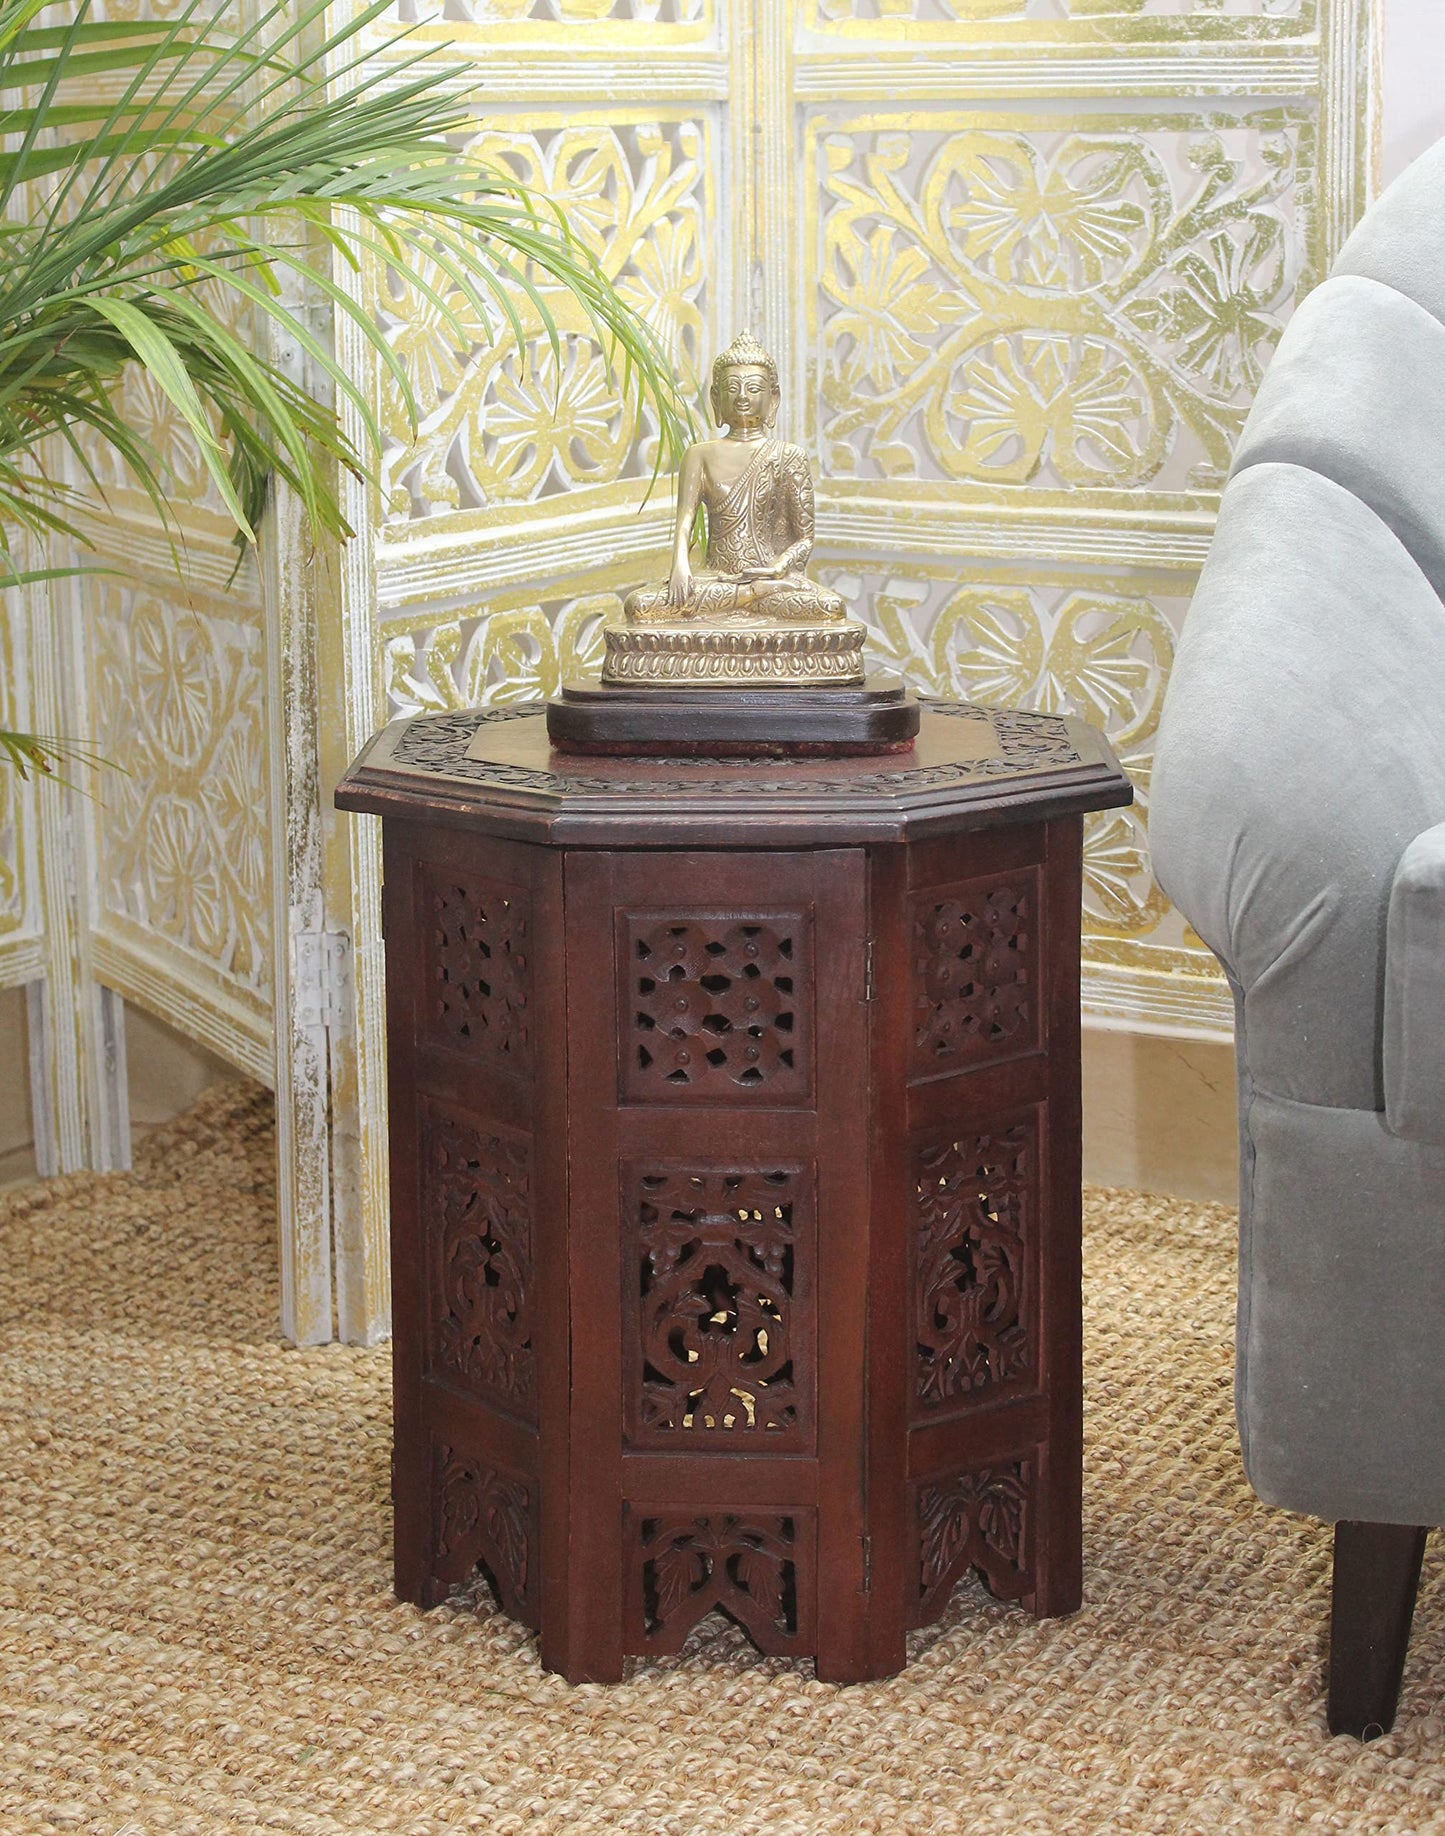 COTTON CRAFT Solid Wood Accent End Table - Hand Carved Vintage Boho Folding Side Table - Small Spaces Entryway Farmhouse Living Room Bedside - No